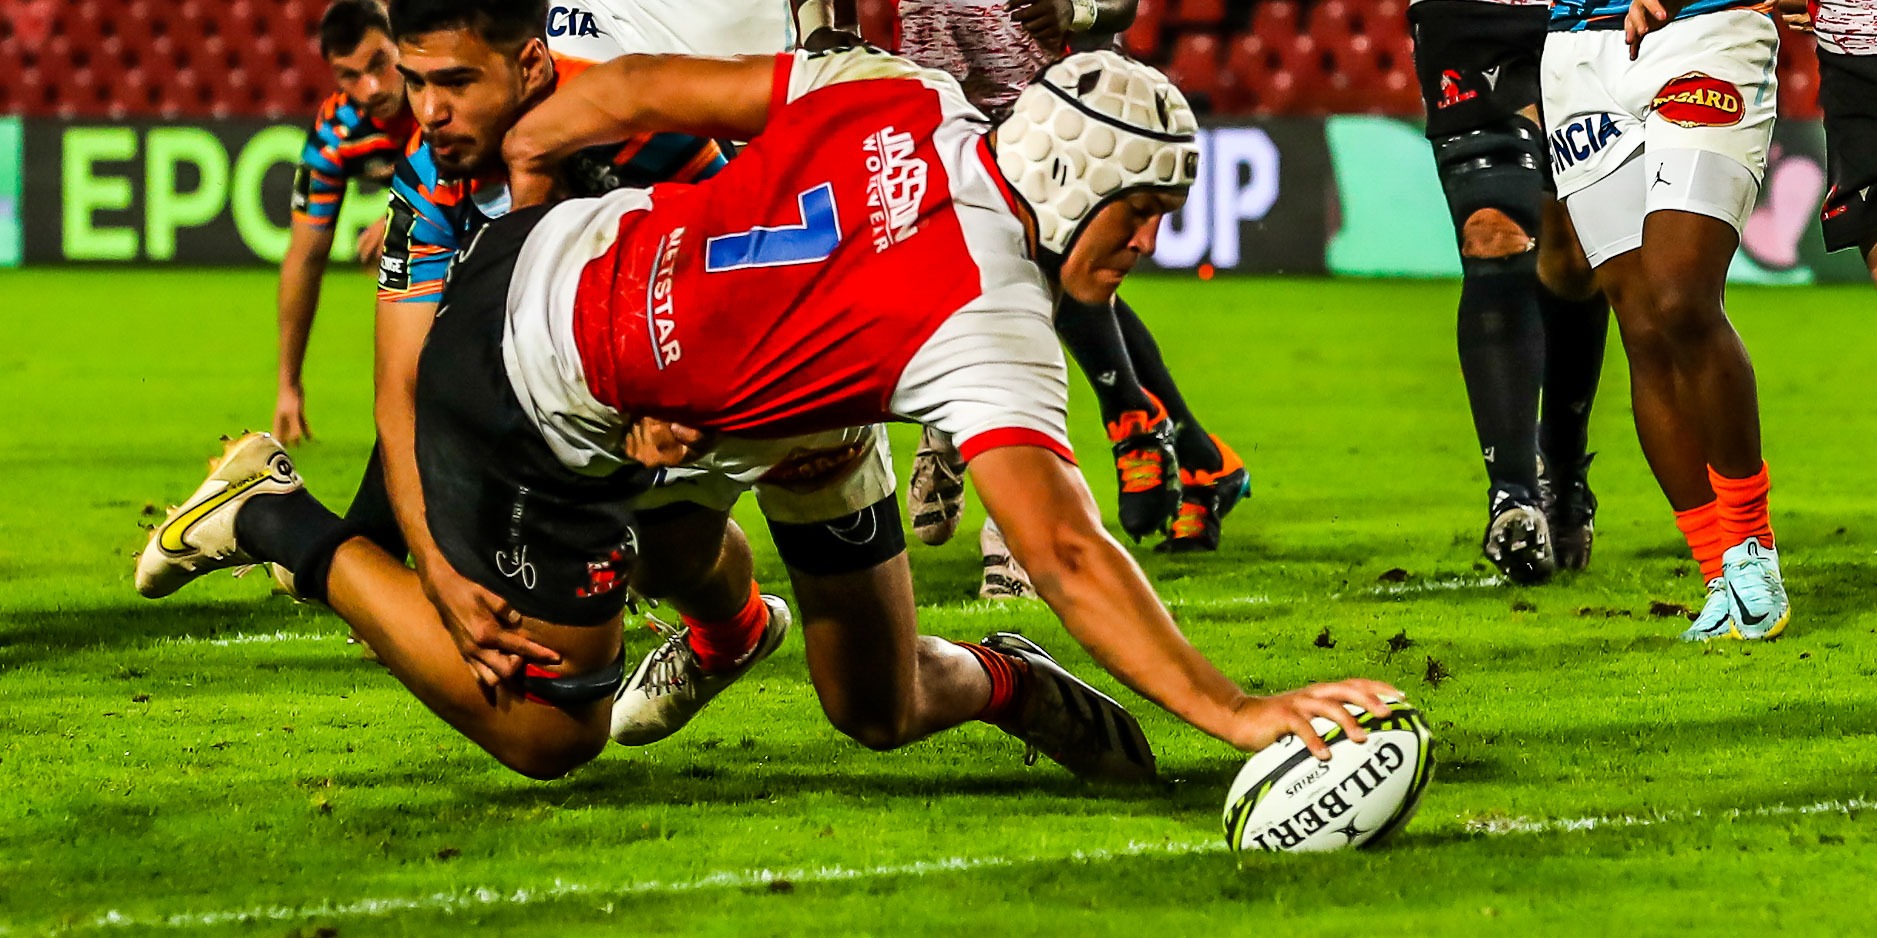 Ruan Venter scores a try for the Emirates Lions against Racing 92.